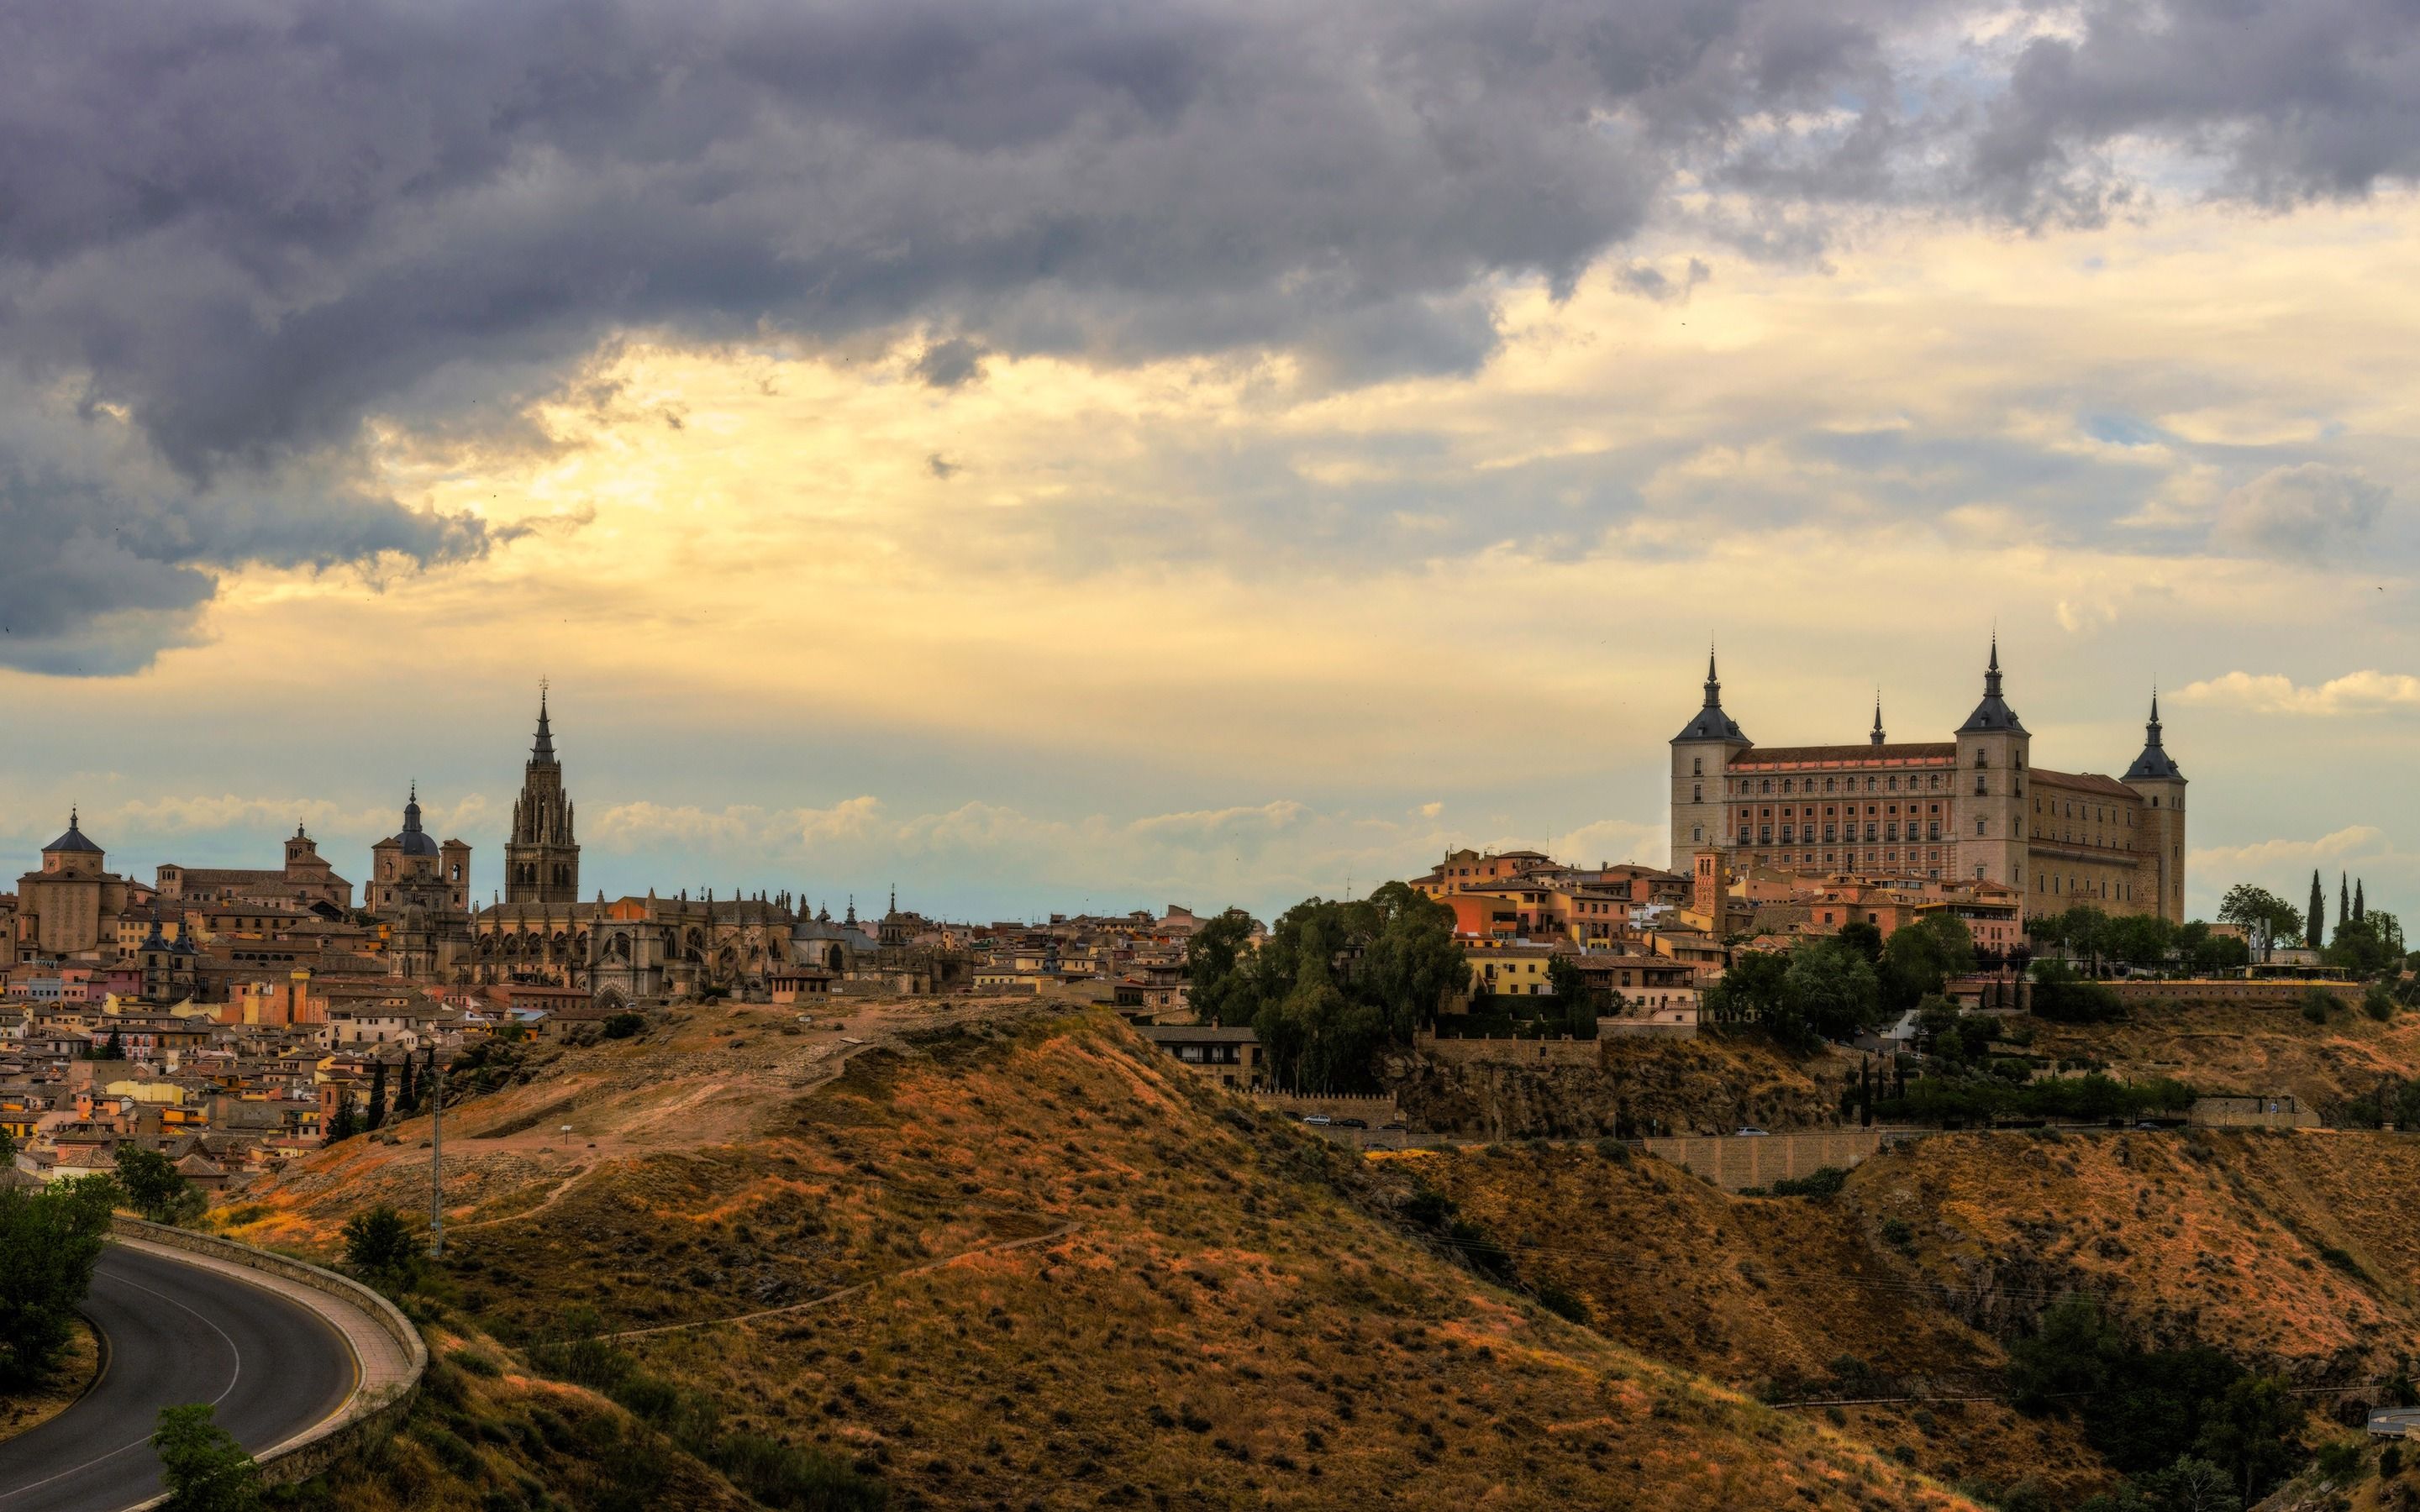 Download wallpaper Toledo, autumn, Alcazar of Toledo, cityscape, evening, sunset, Spain for desktop with resolution 2880x1800. High Quality HD picture wallpaper